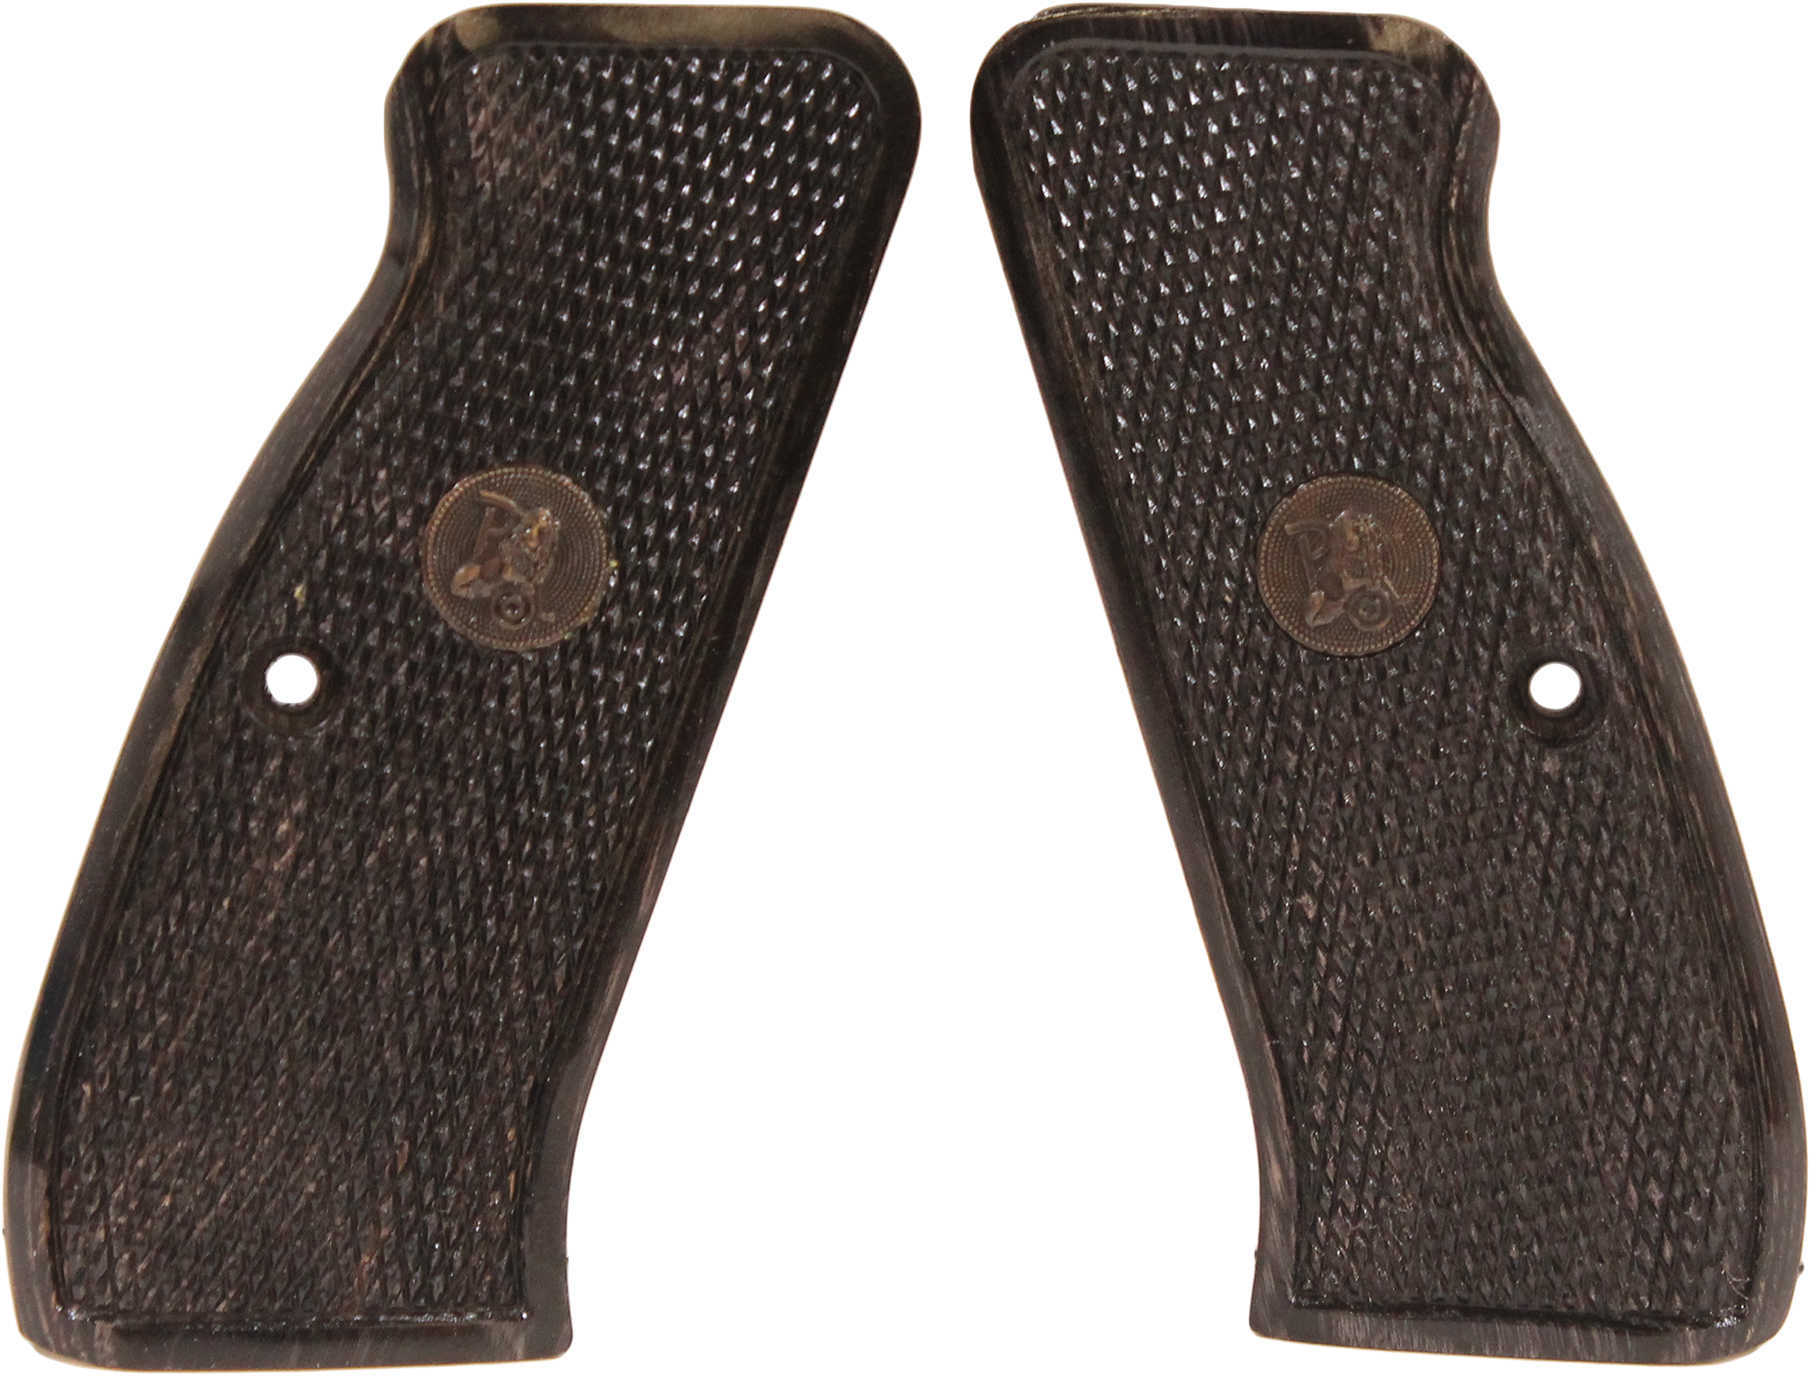 Pachmayr Laminated Wood Grips Full Size CZ 75/85 Black/Gray Checkered